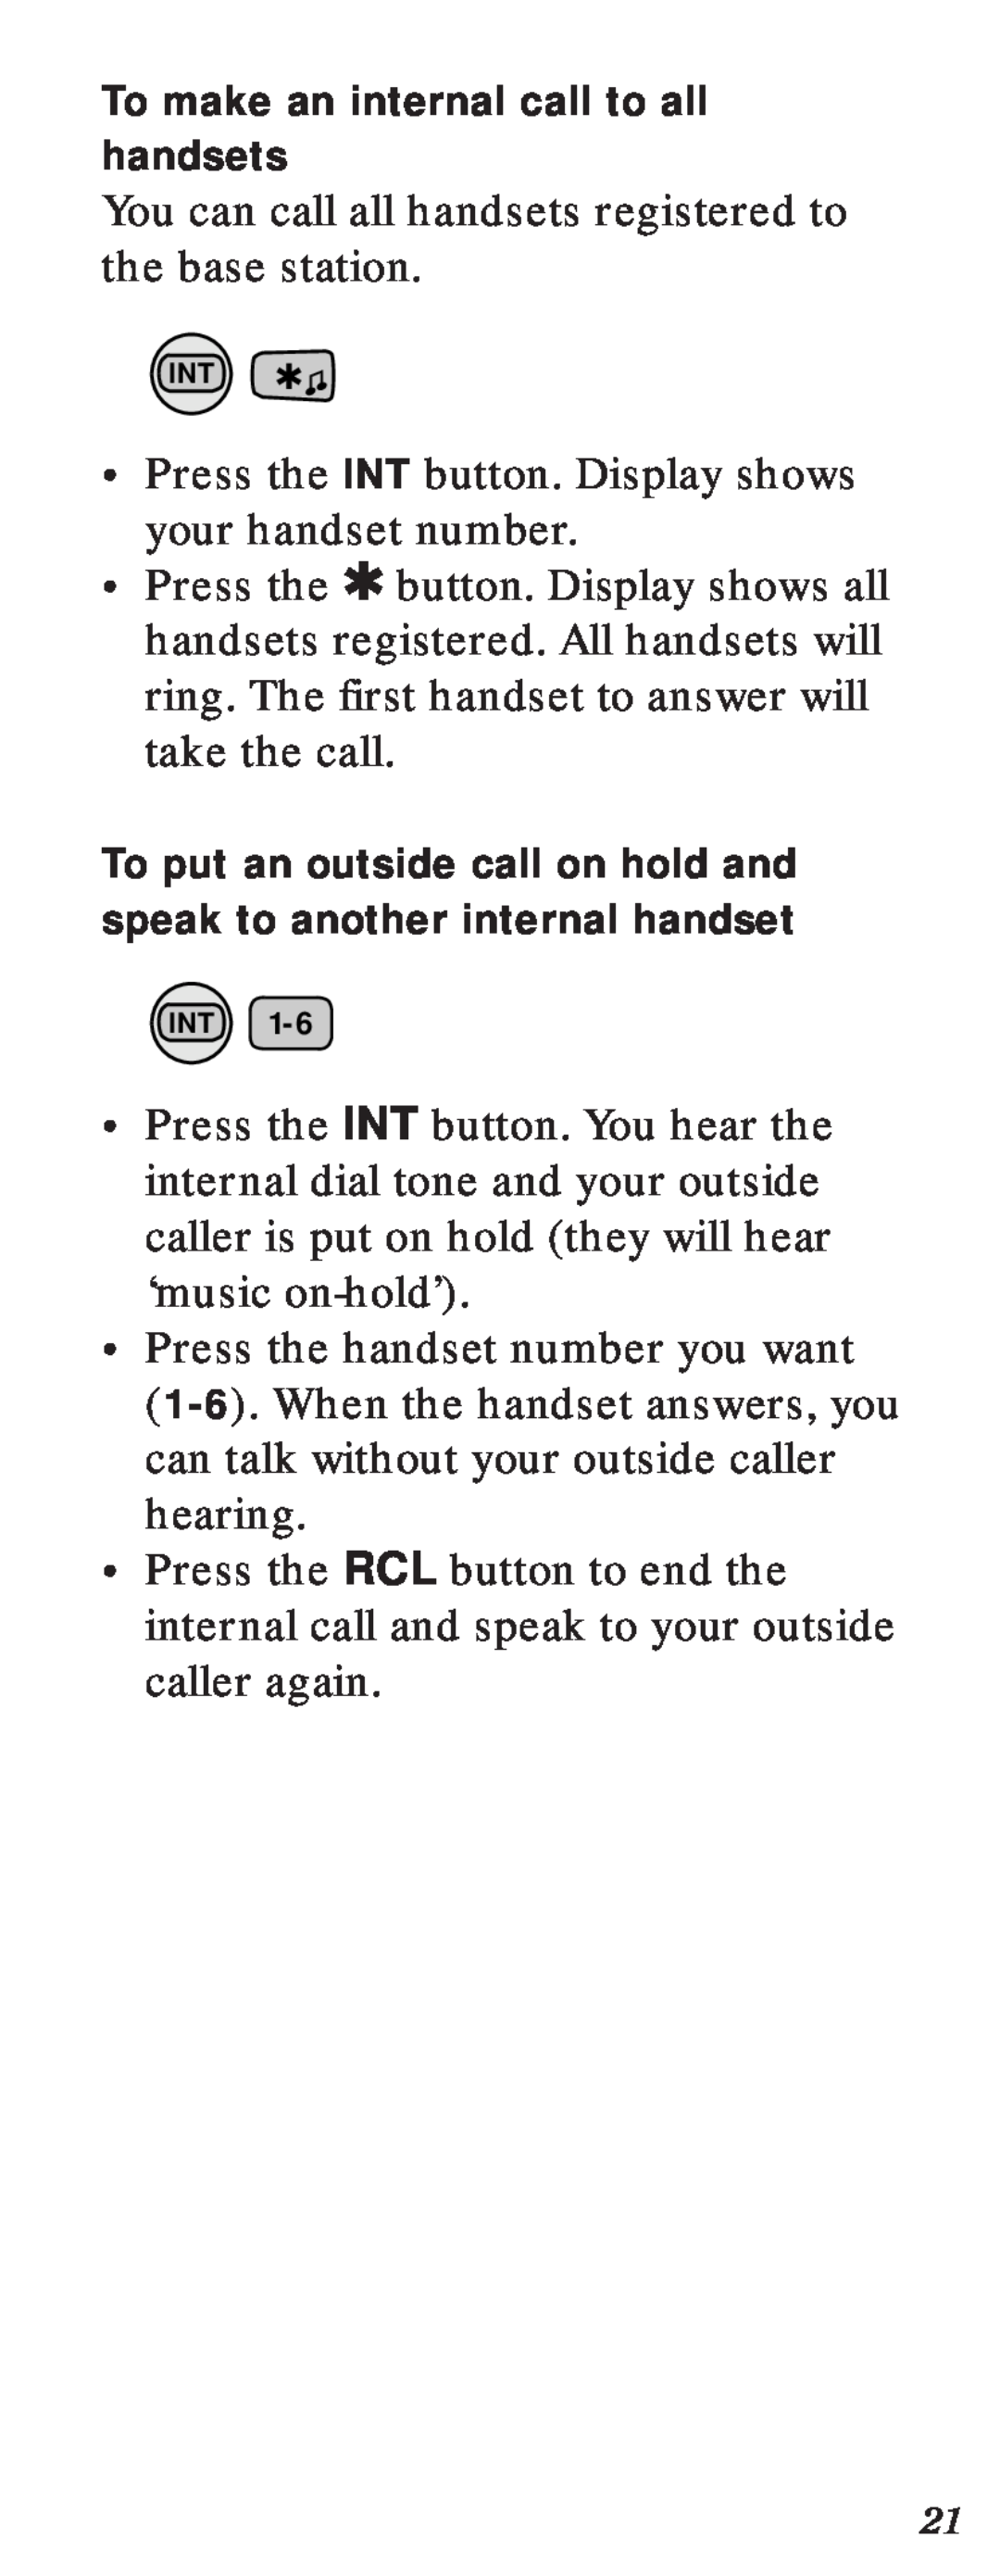 BT 2000 To make an internal call to all handsets, To put an outside call on hold and speak to another internal handset 